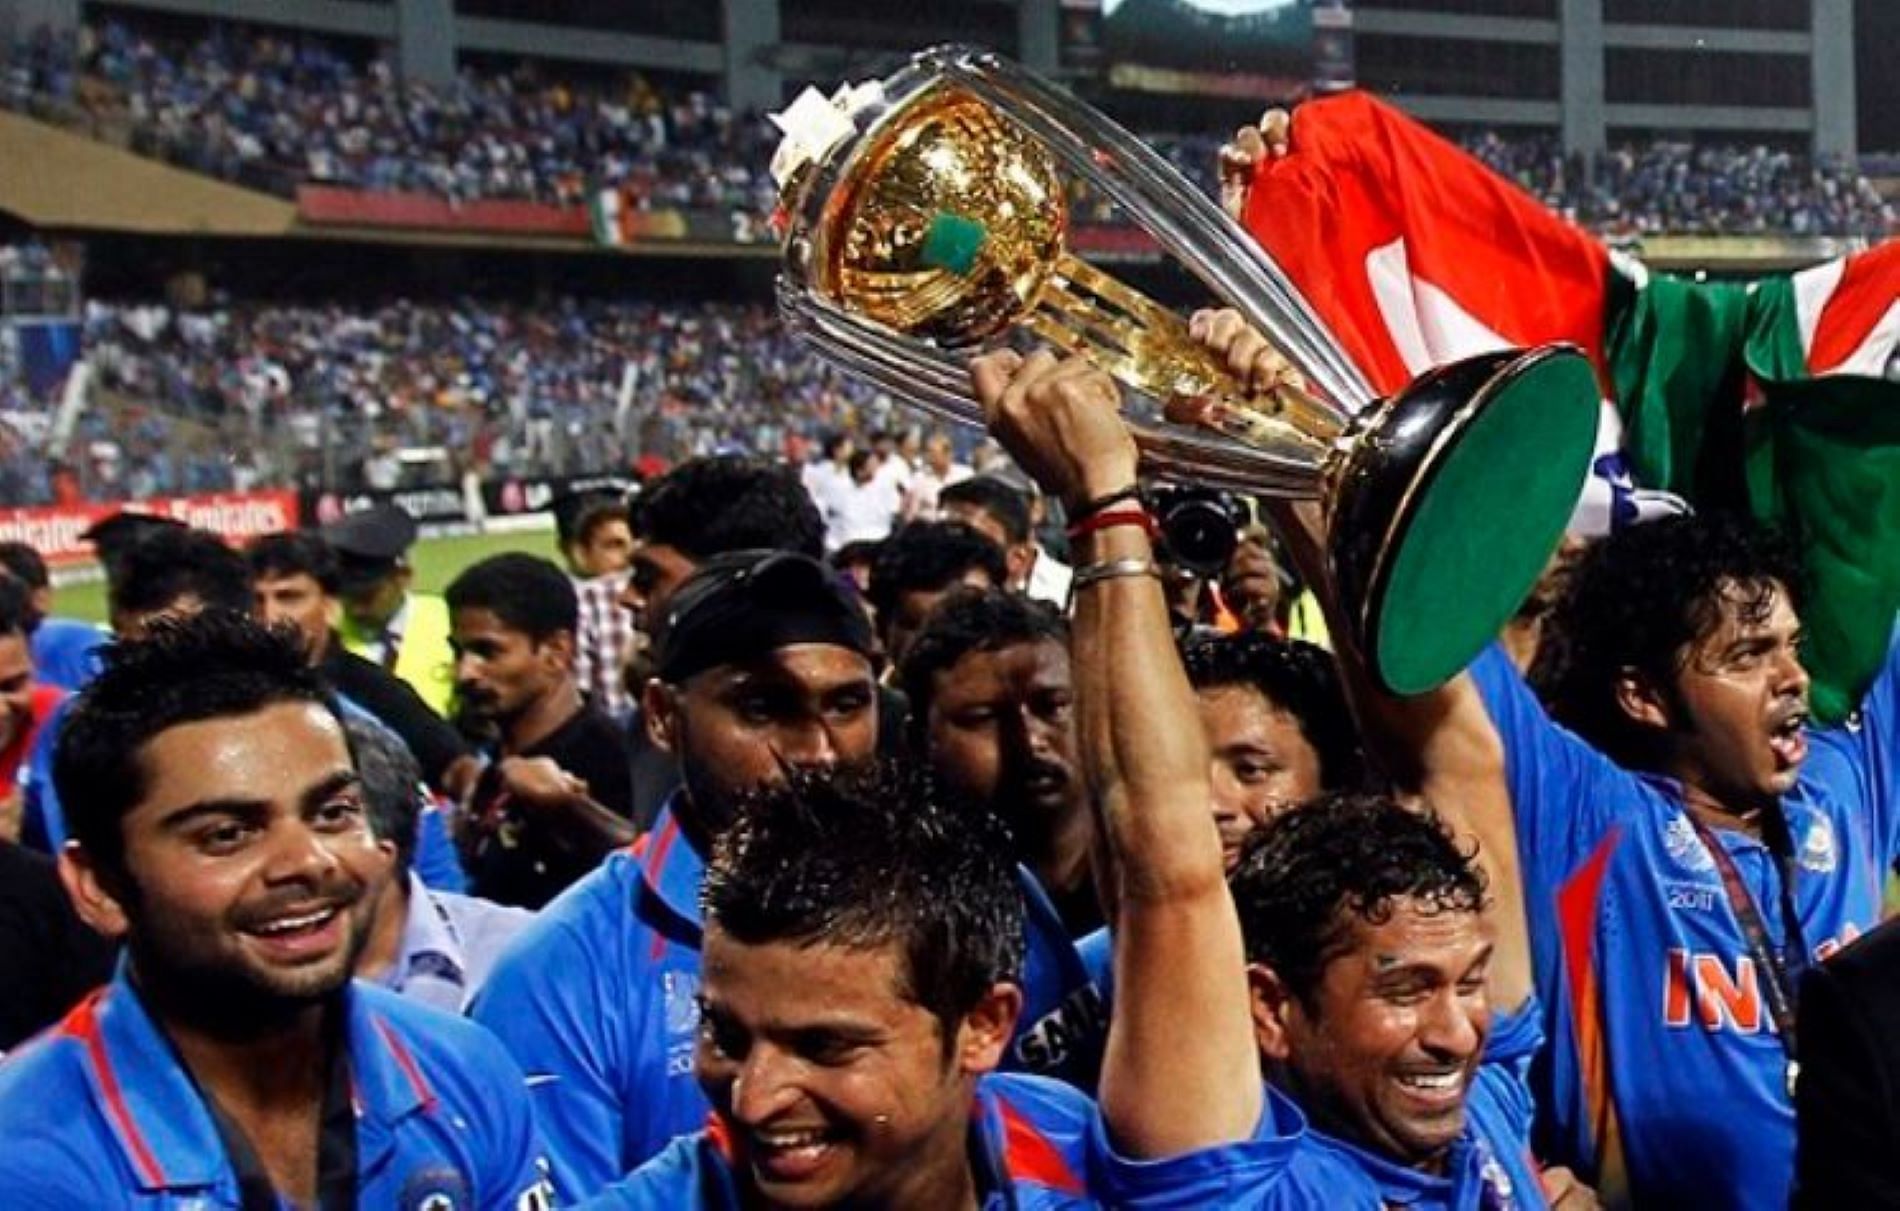 Kohli won his only World Cup at the international level in 2011